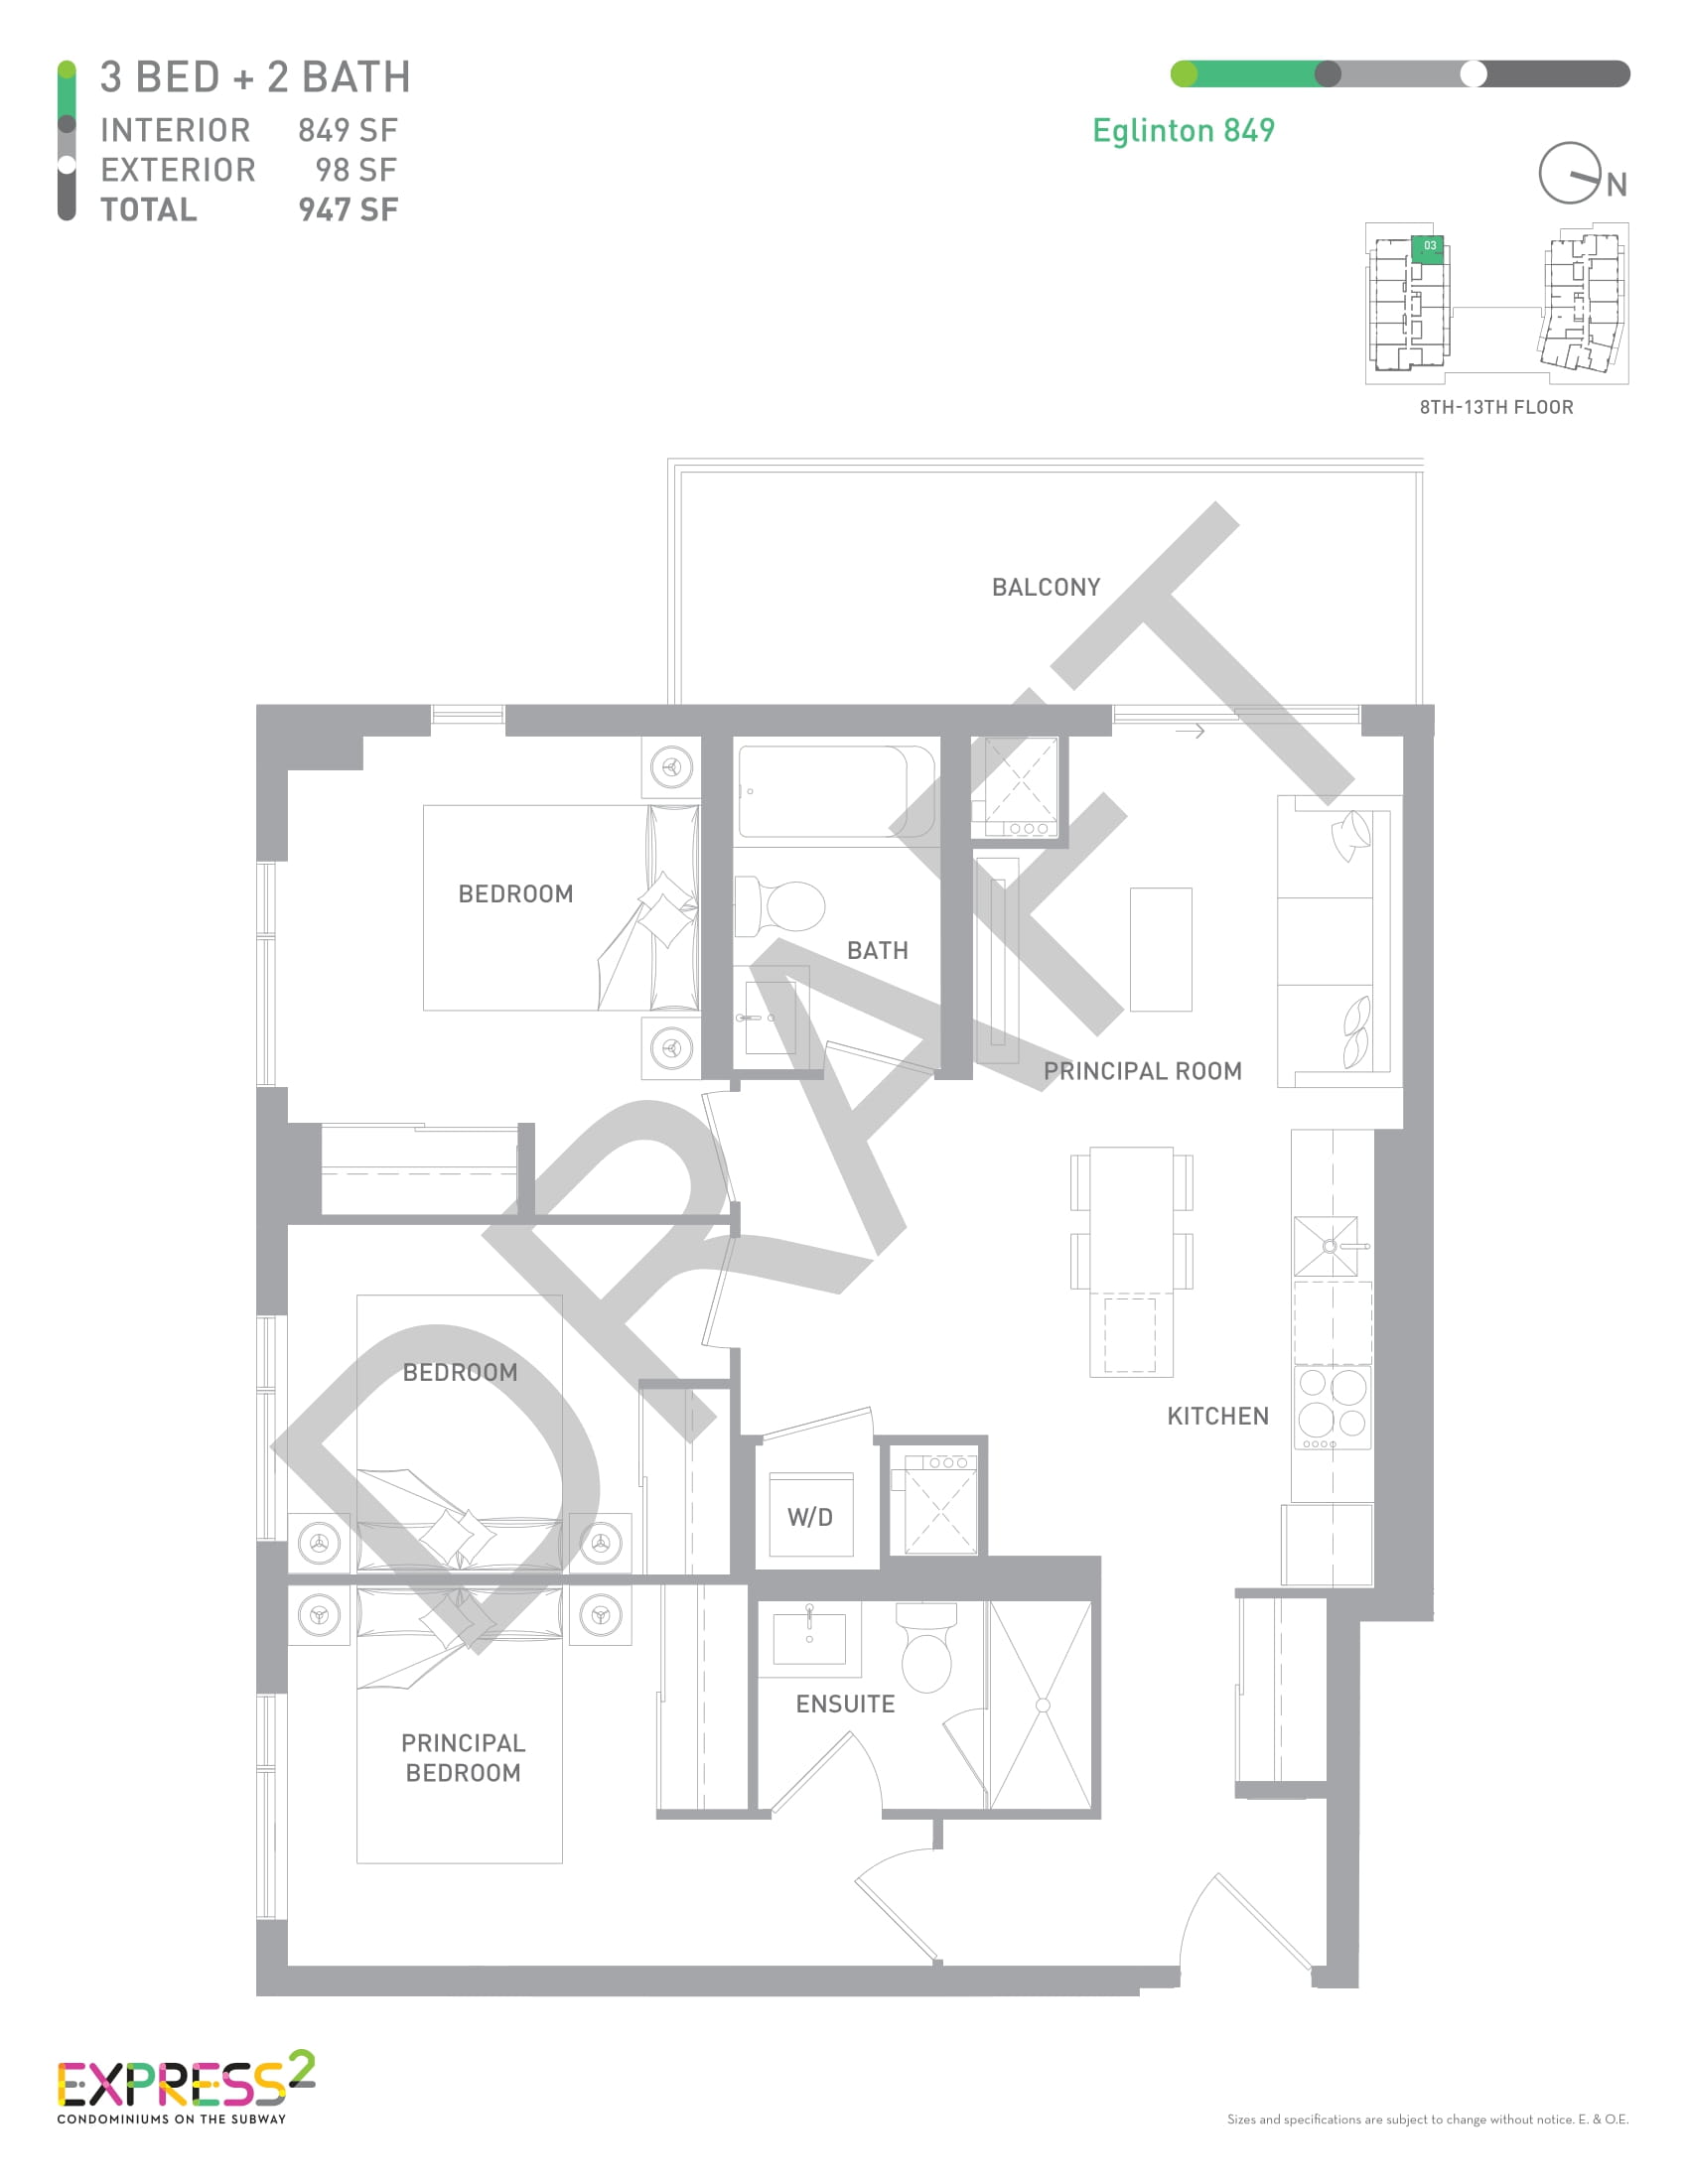 Express 2 Preview Floor Plans-14